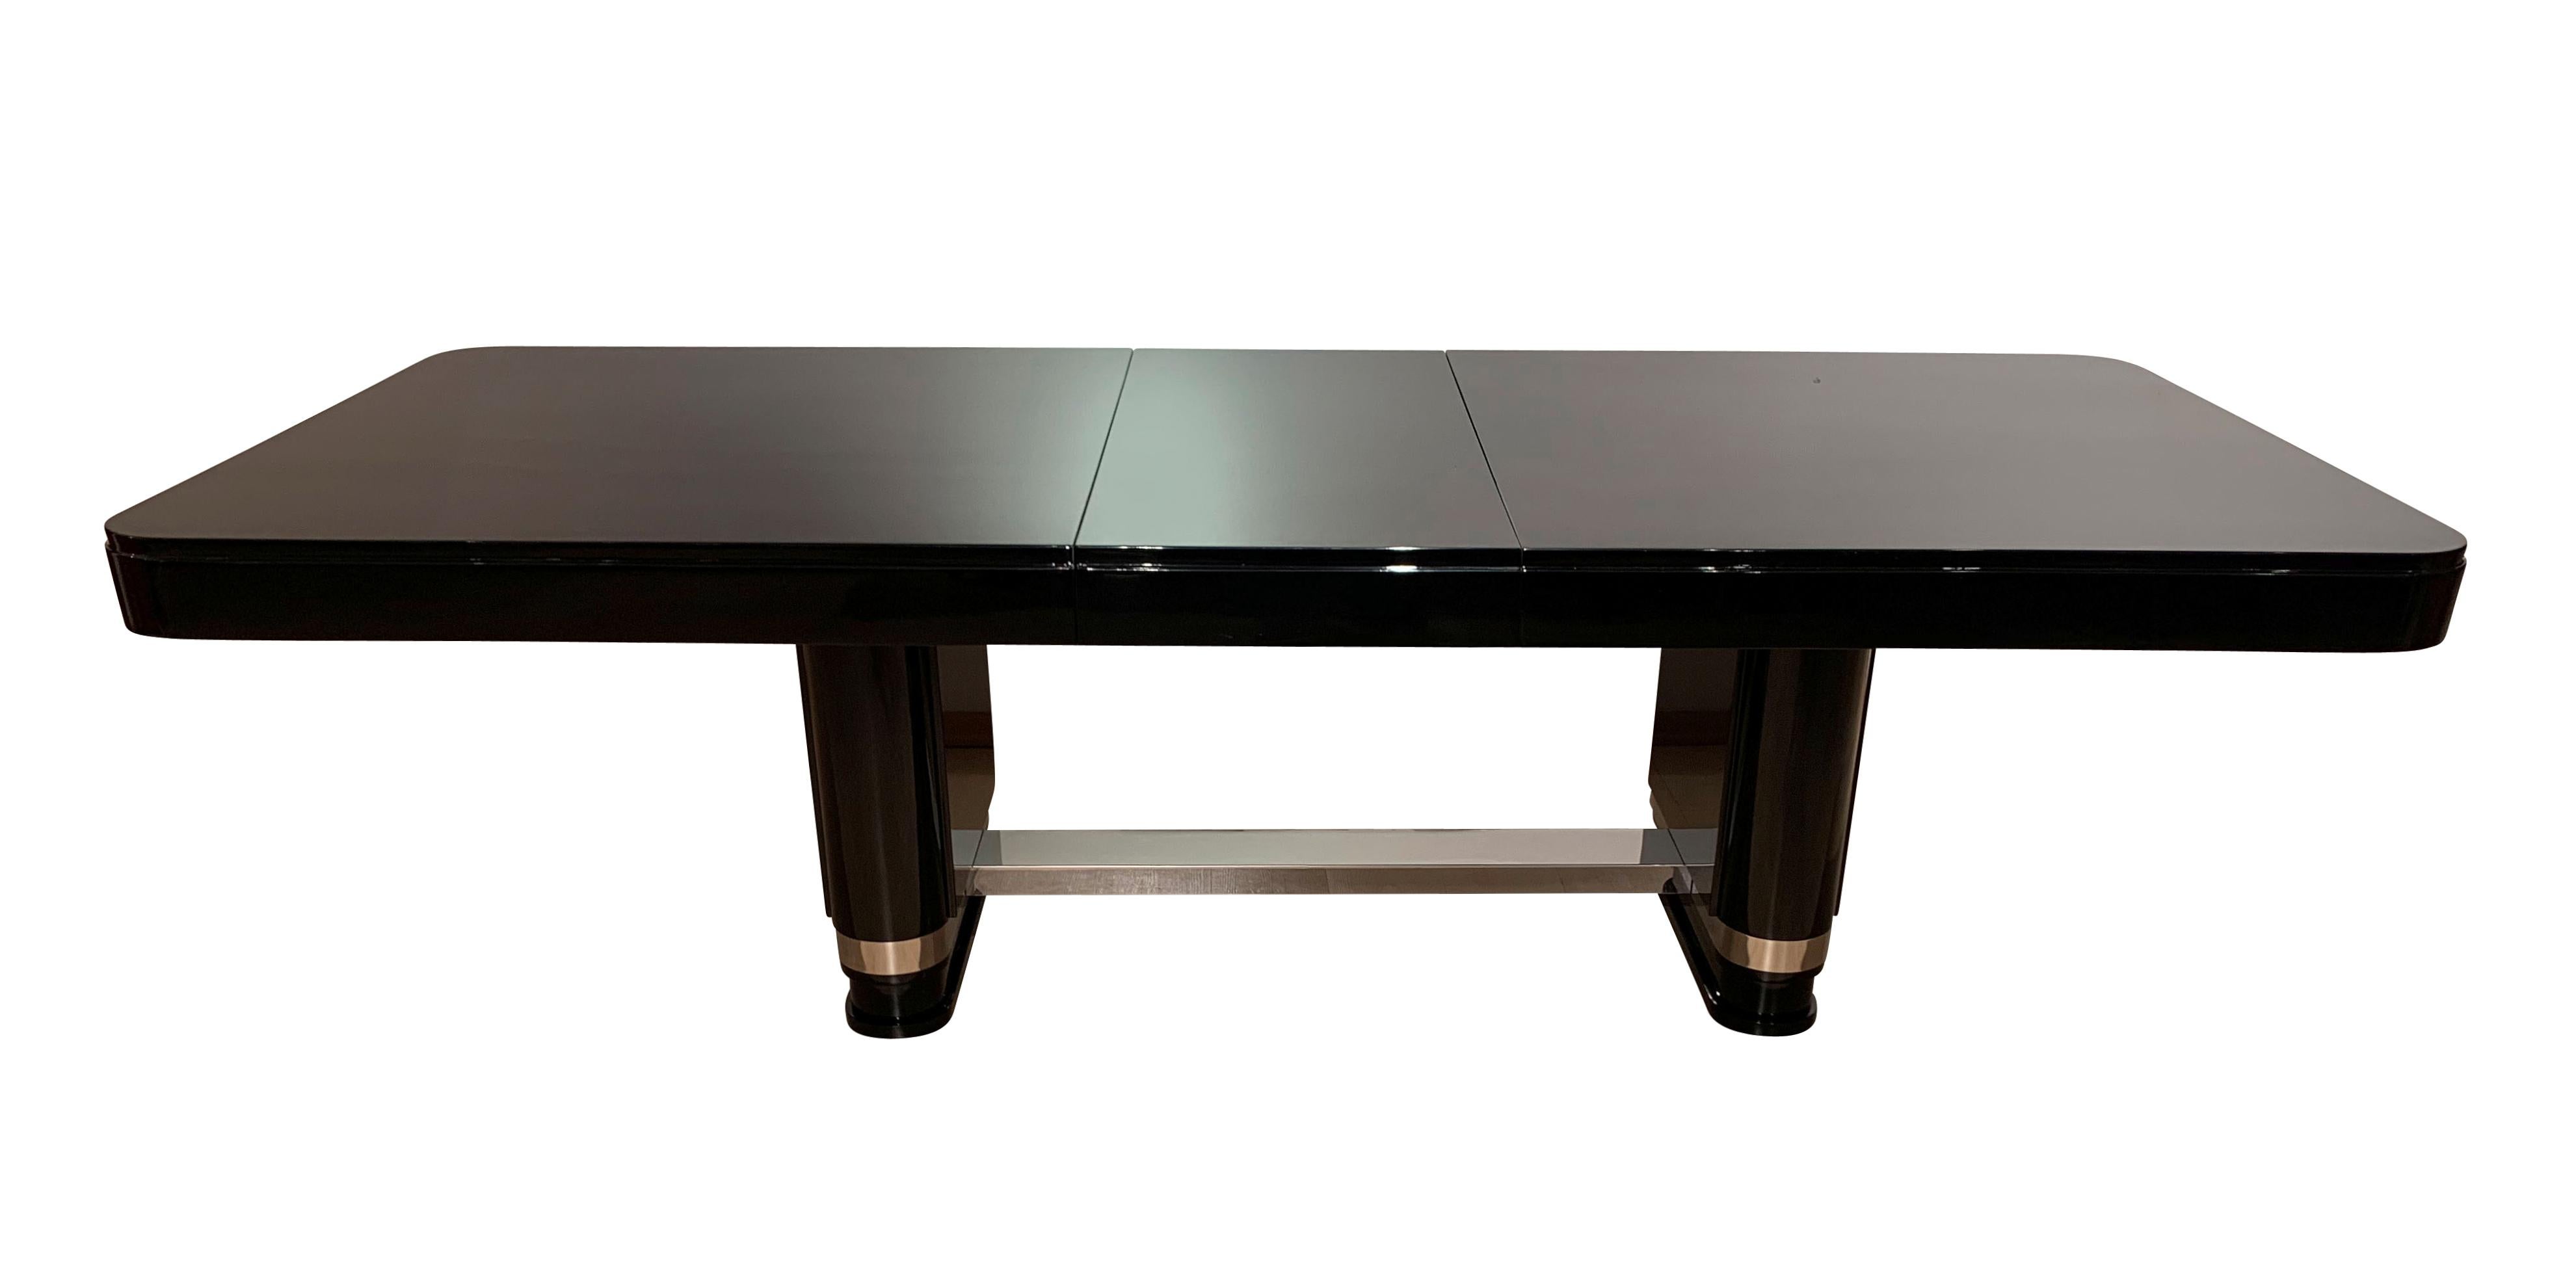 Lacquered Large Art Deco Expandable Table, Black Lacquer and Metal, France, 1930s